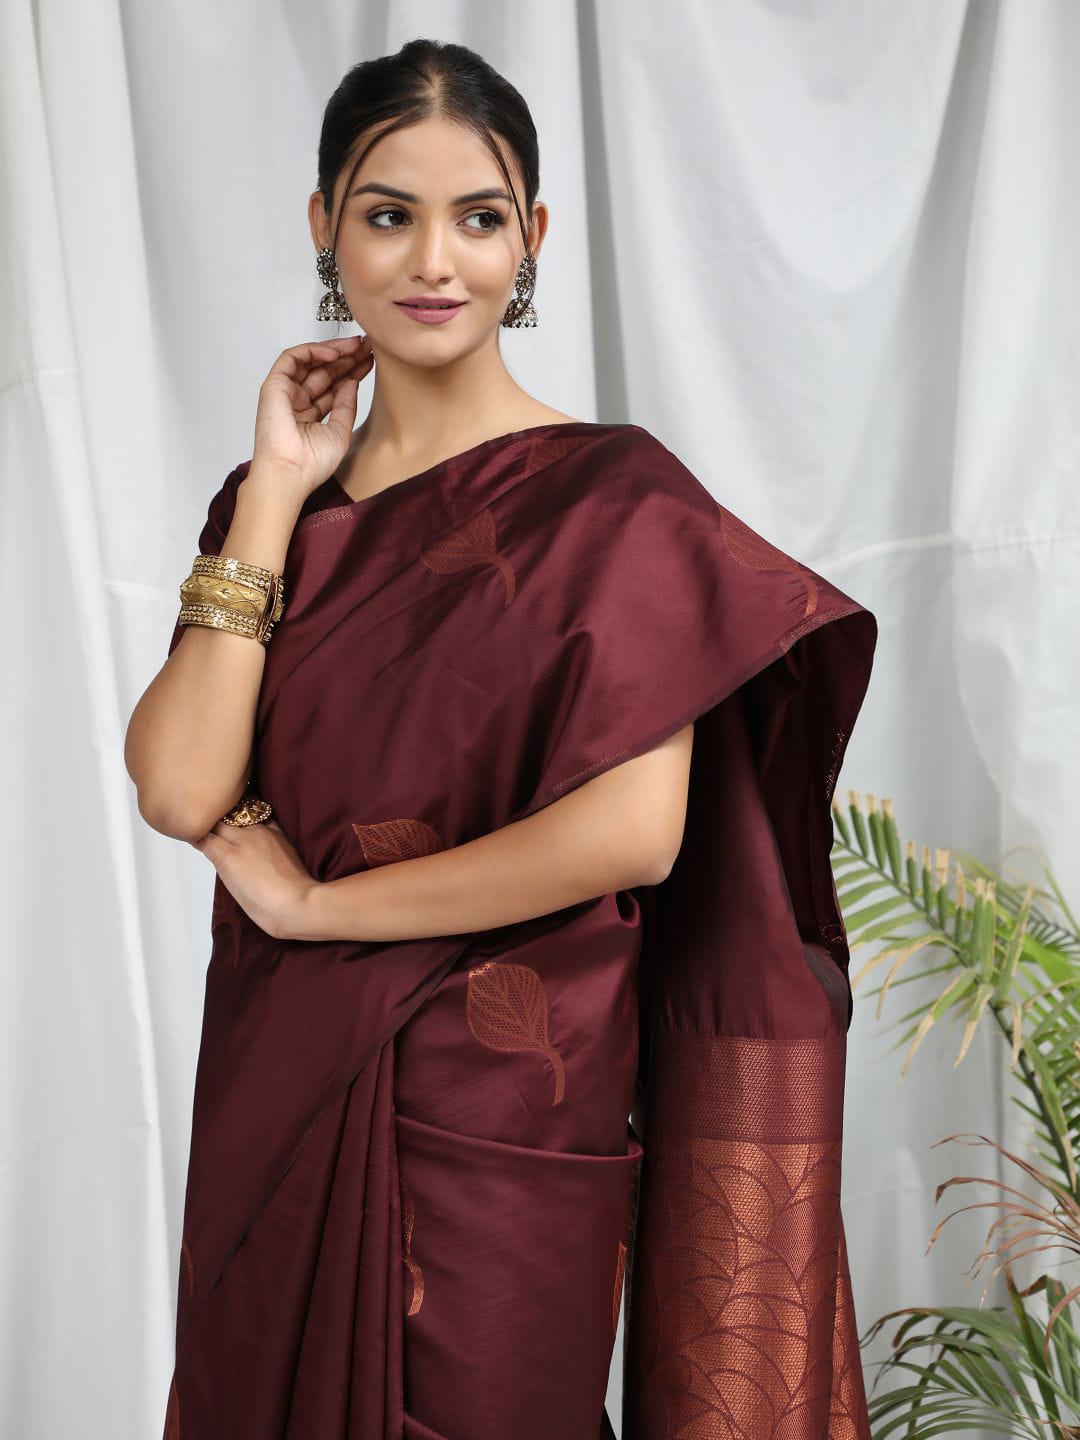 Party Wear Soft Silk Saree Anant Tex Exports Private Limited